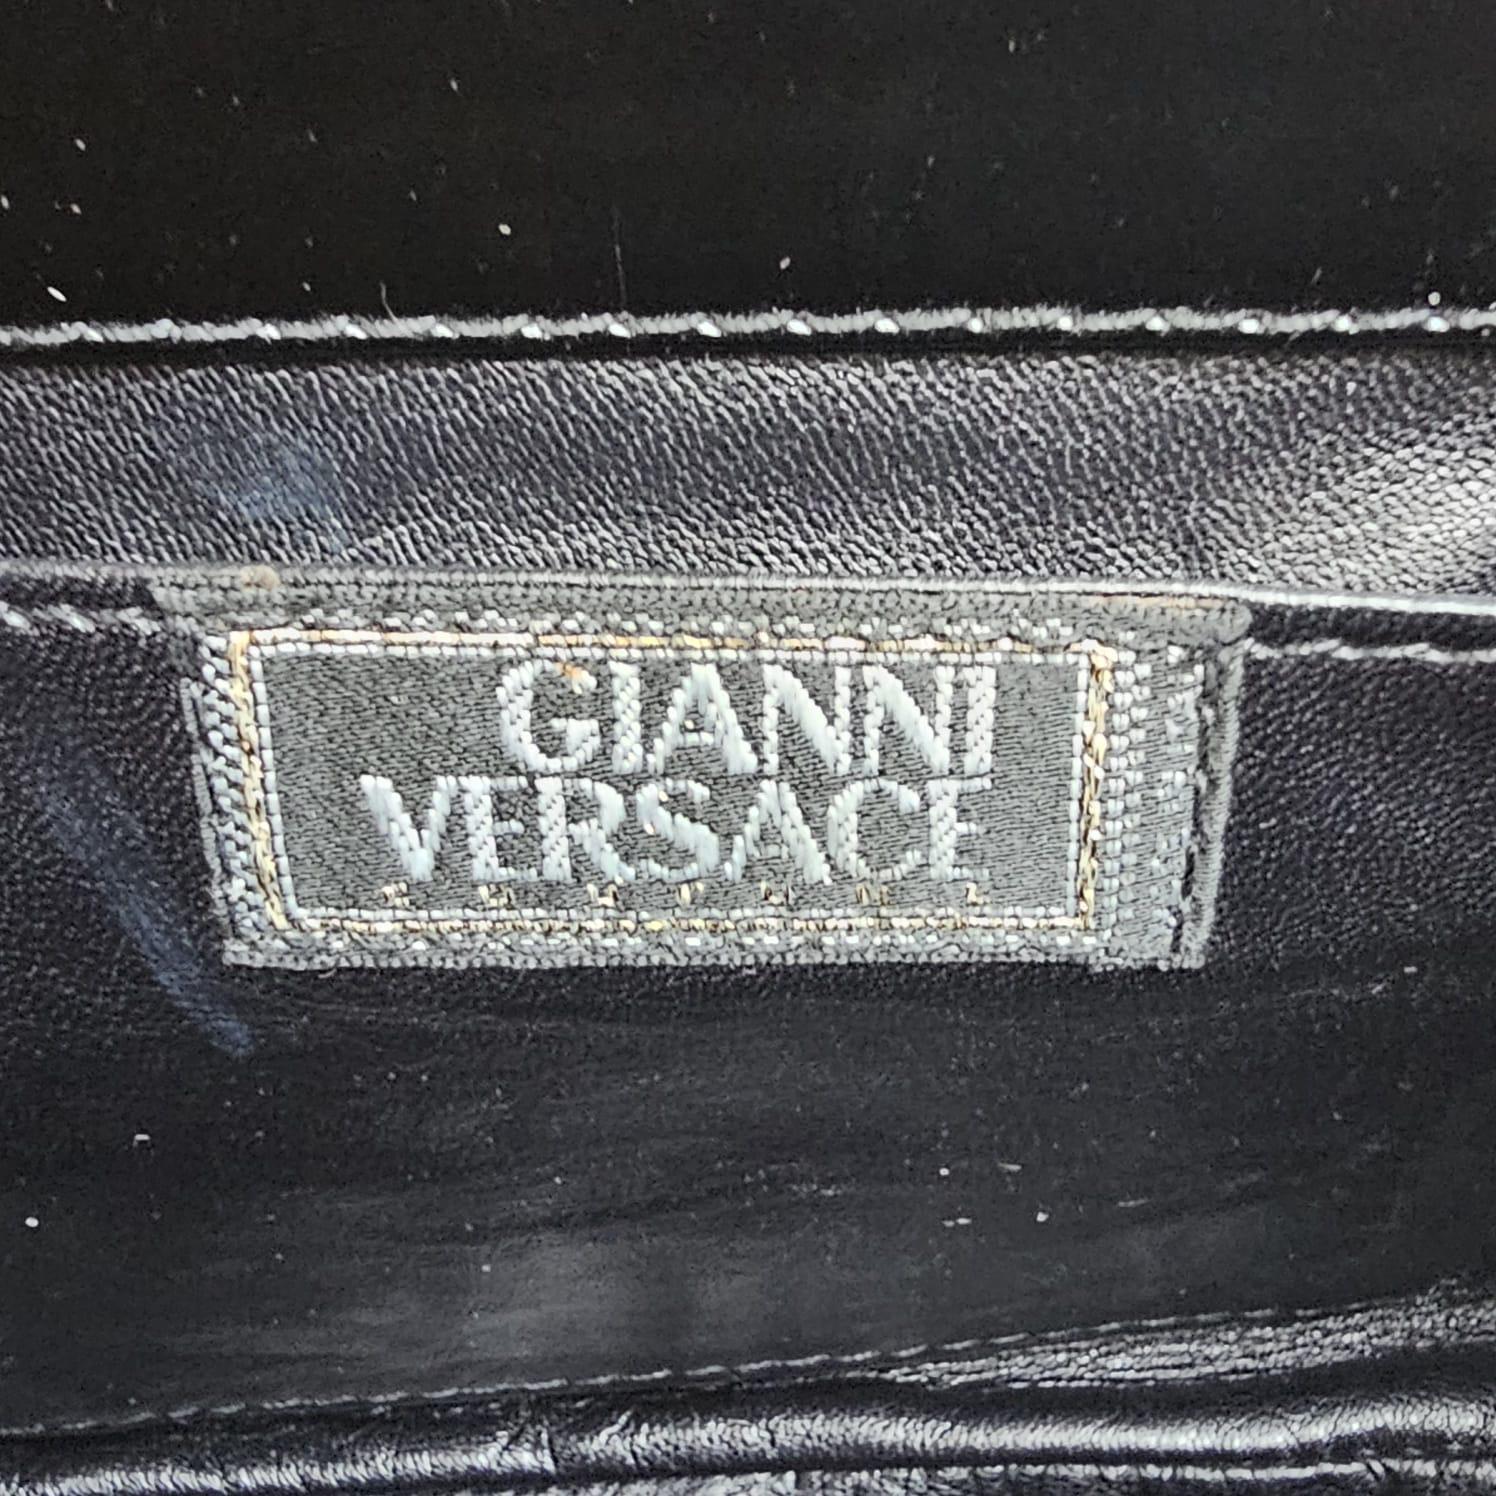 Very Rare Vintage 1994 Gianni Versace Black Patent Safety Pin Top Handle Bag In Good Condition For Sale In Jakarta, Daerah Khusus Ibukota Jakarta